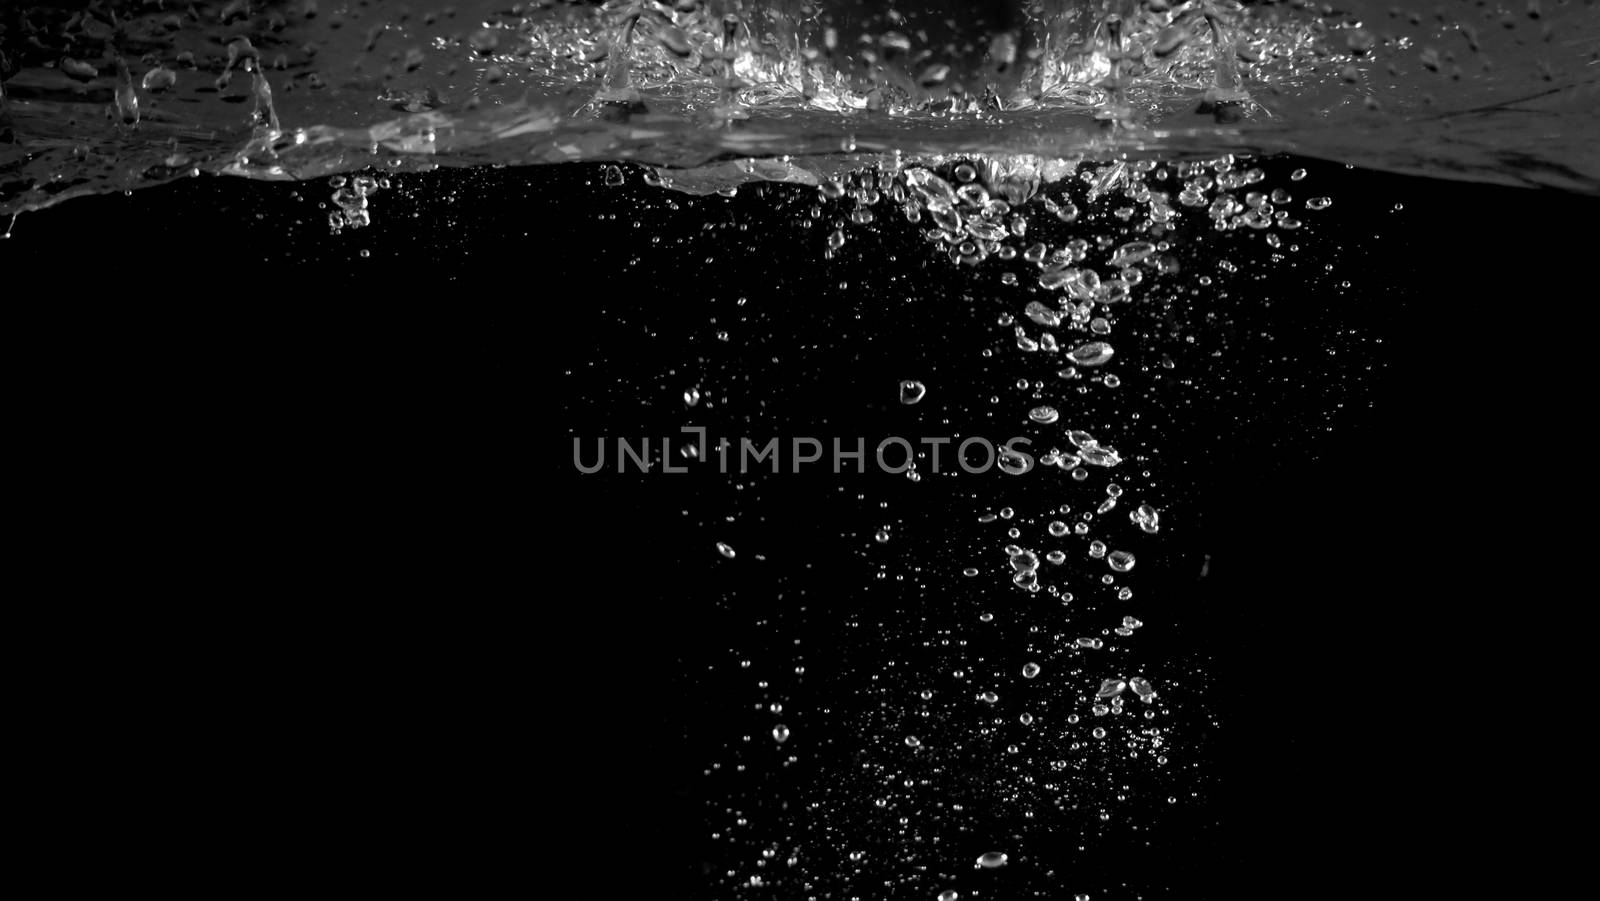 Blurry images of soda bubbles splashing in black background by gnepphoto